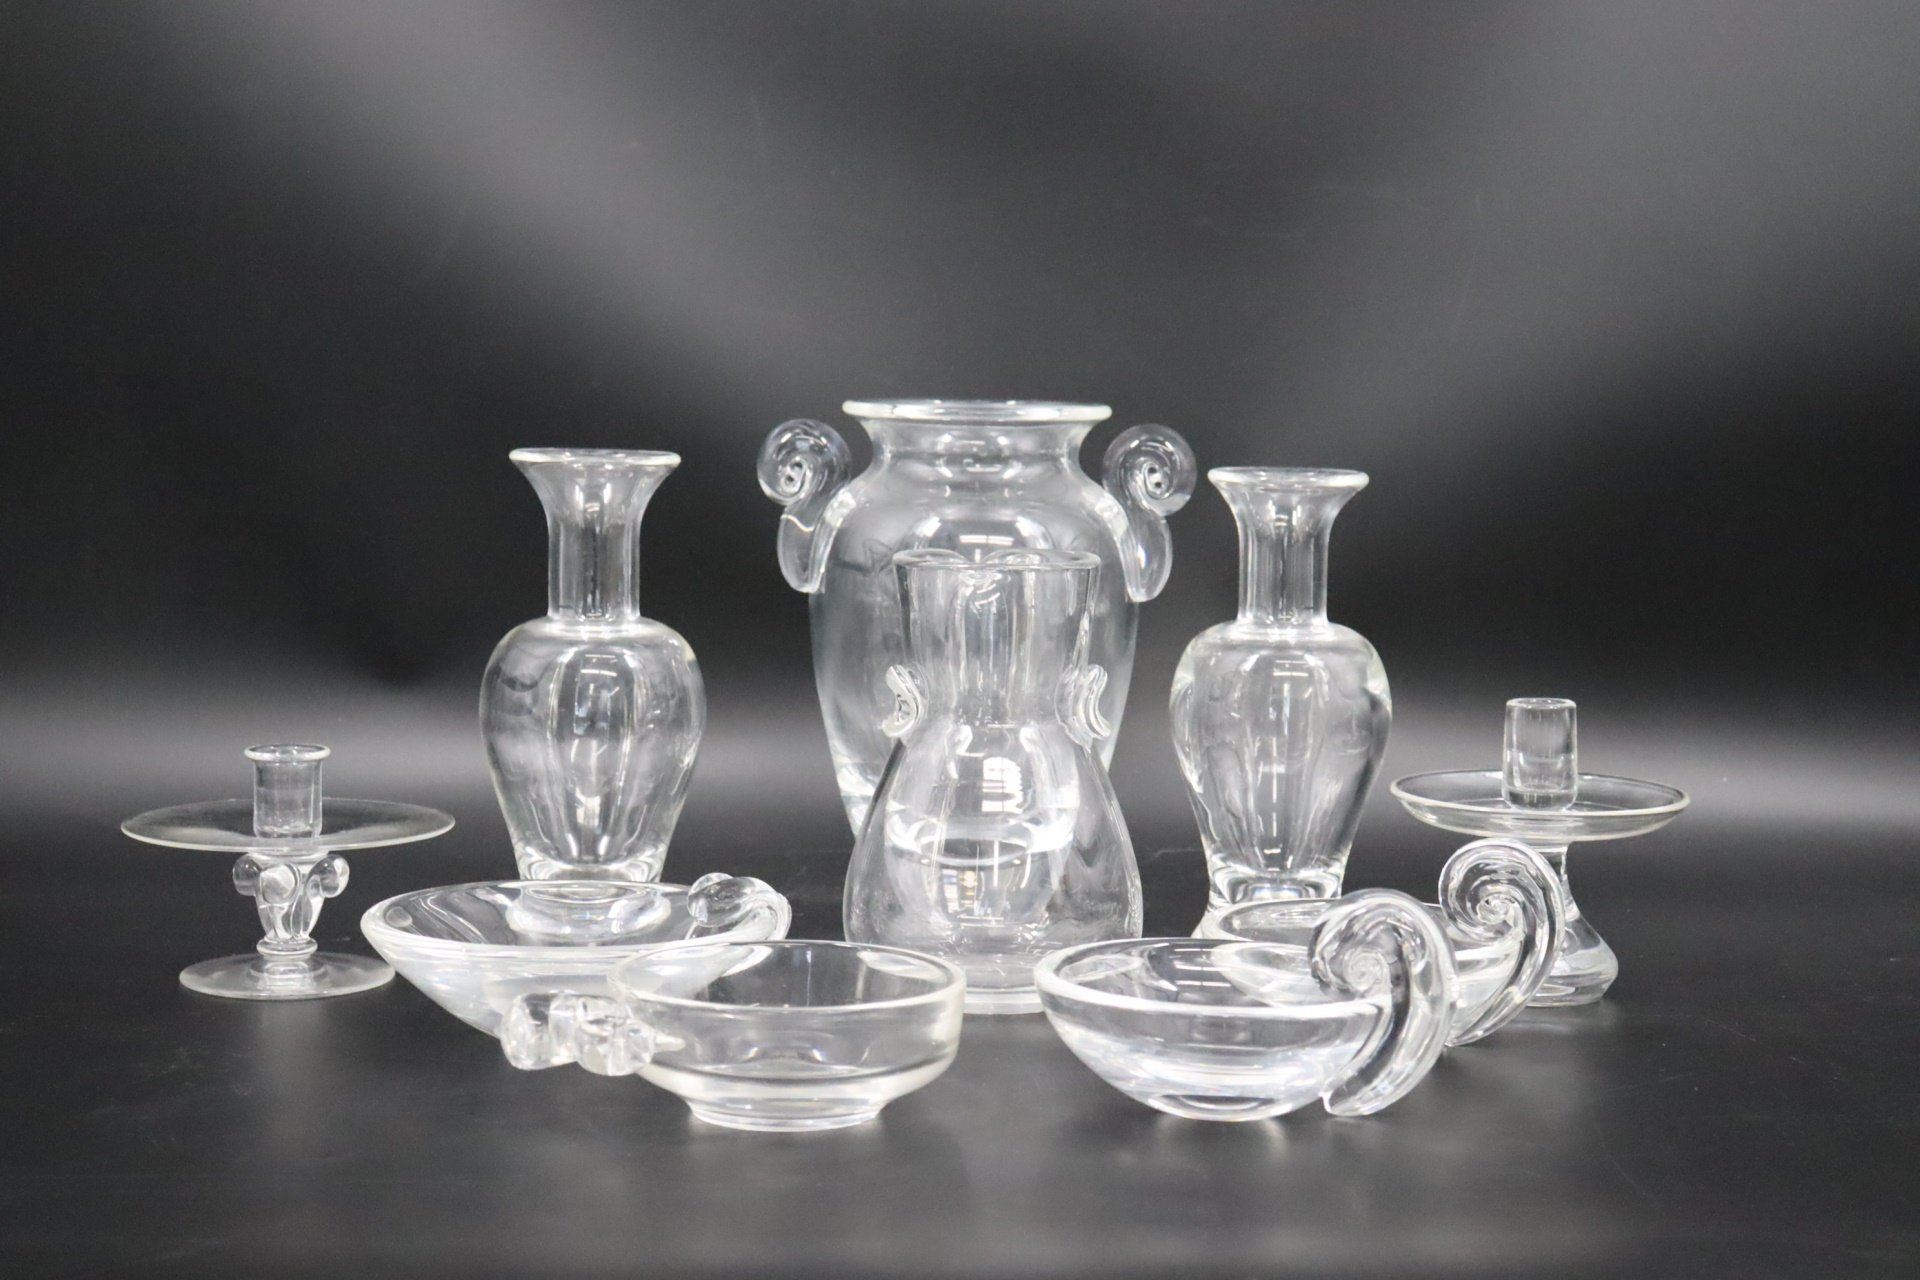 COLLECTION OF STEUBEN GLASS 10